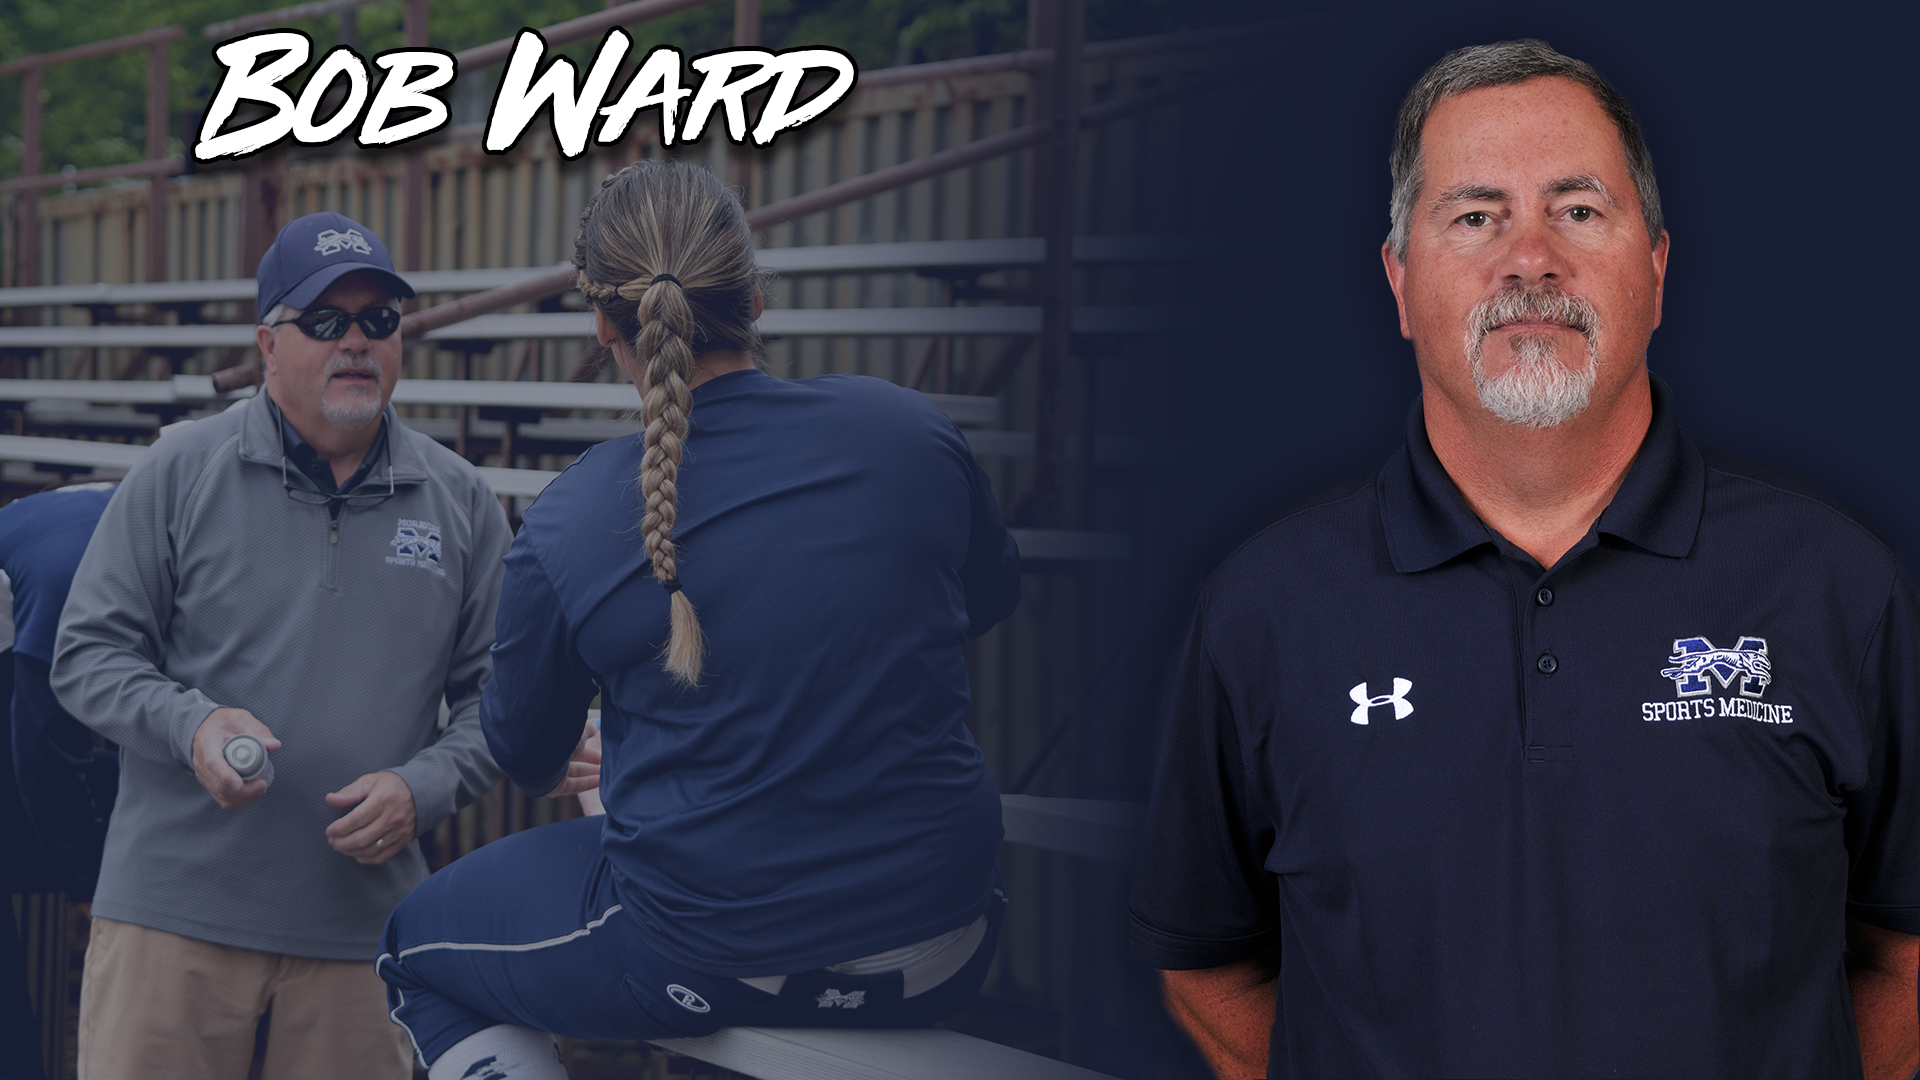 Bob Ward is retiring after 32 years as Moravian's Head Athletics Trainer.